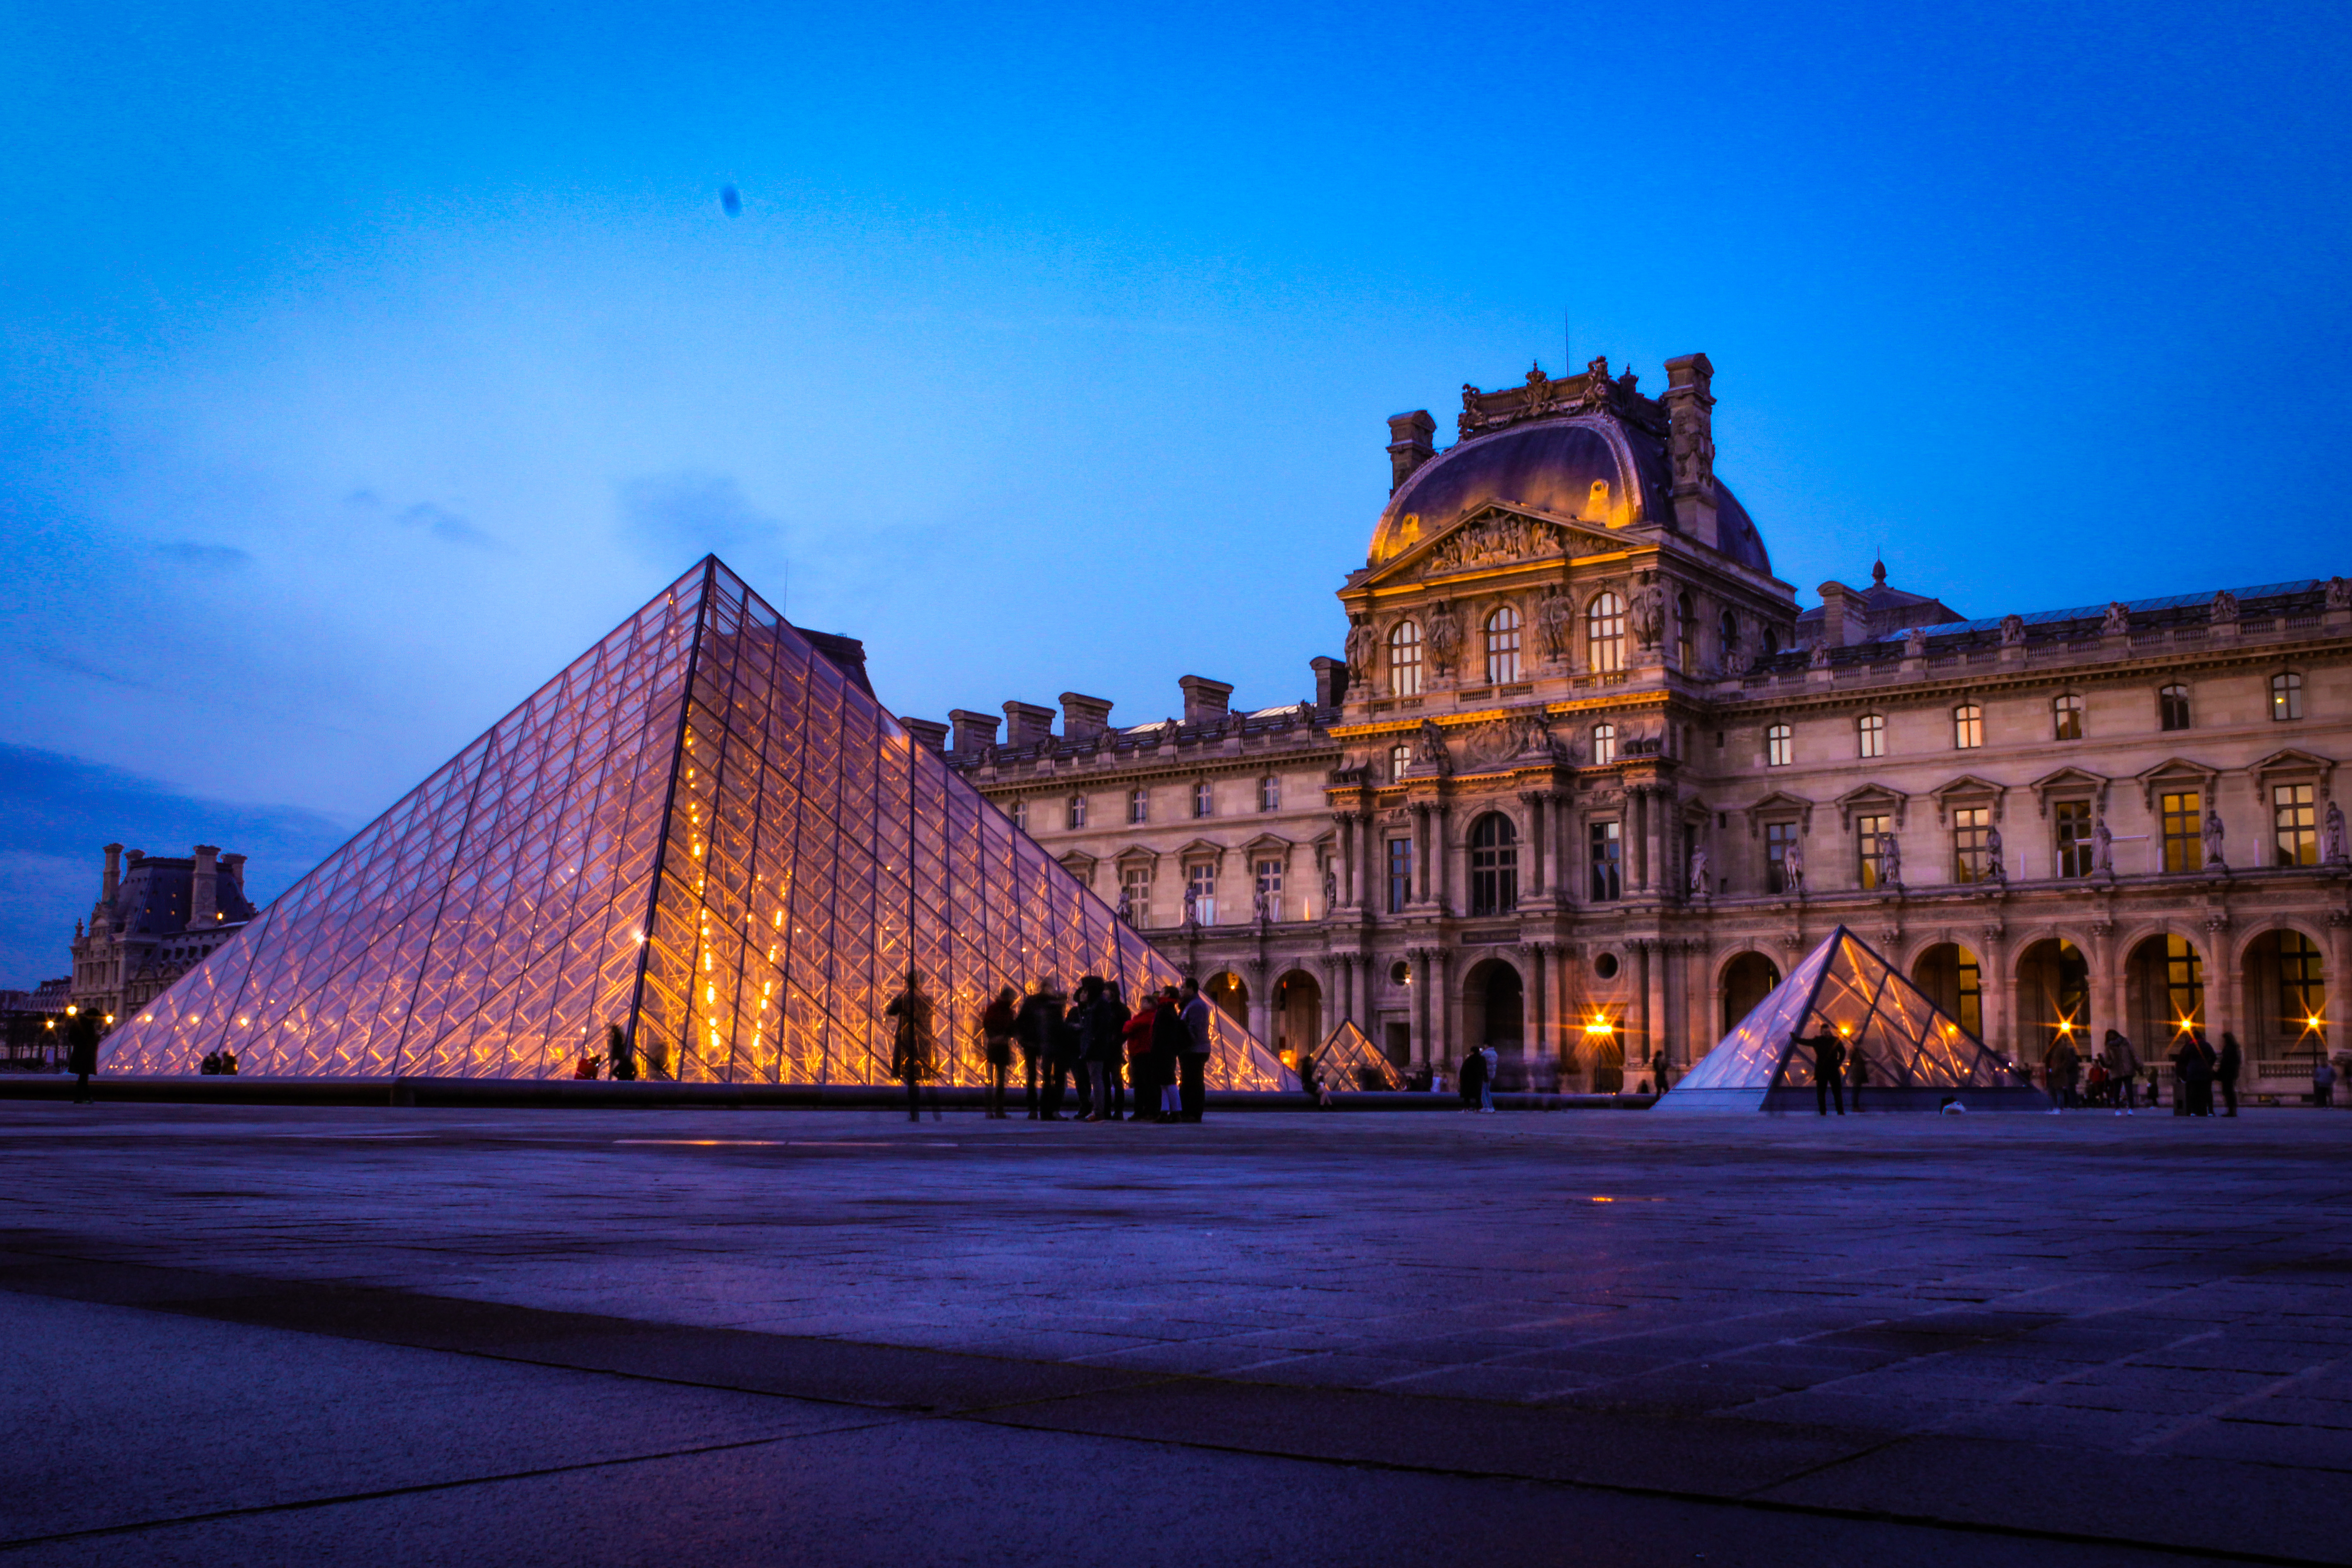 Tonny's picture of the Louvre at night